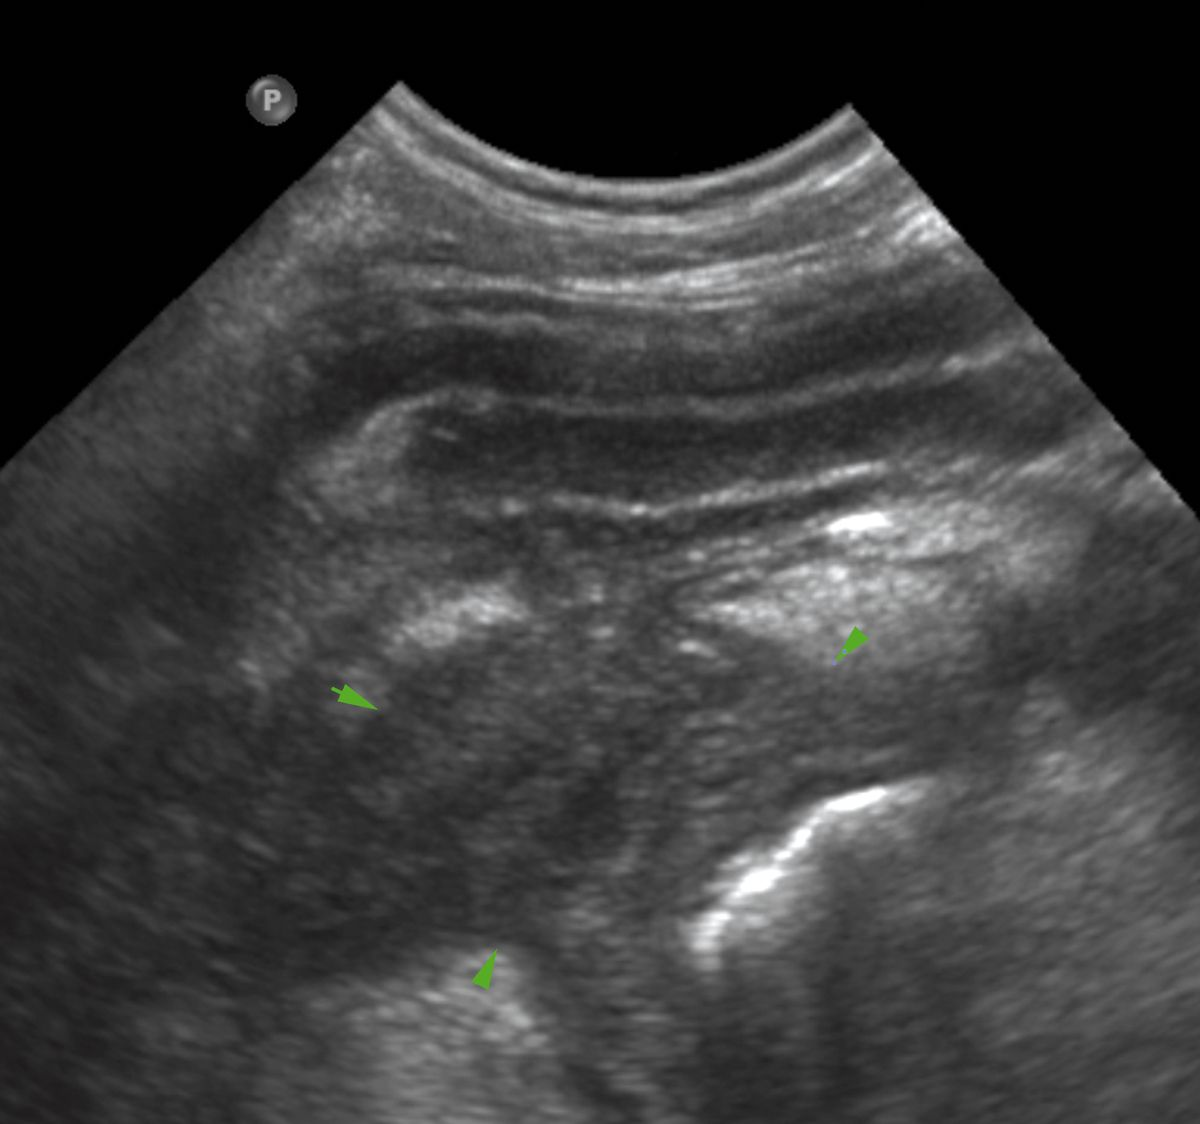 Ultrasound image of pancreatitis in a dog: the pancreas is thickened and hypoechoic (green arrow heads) and is surrounded by hyperechoic fat. The adjacent duodenal wall is thickened.